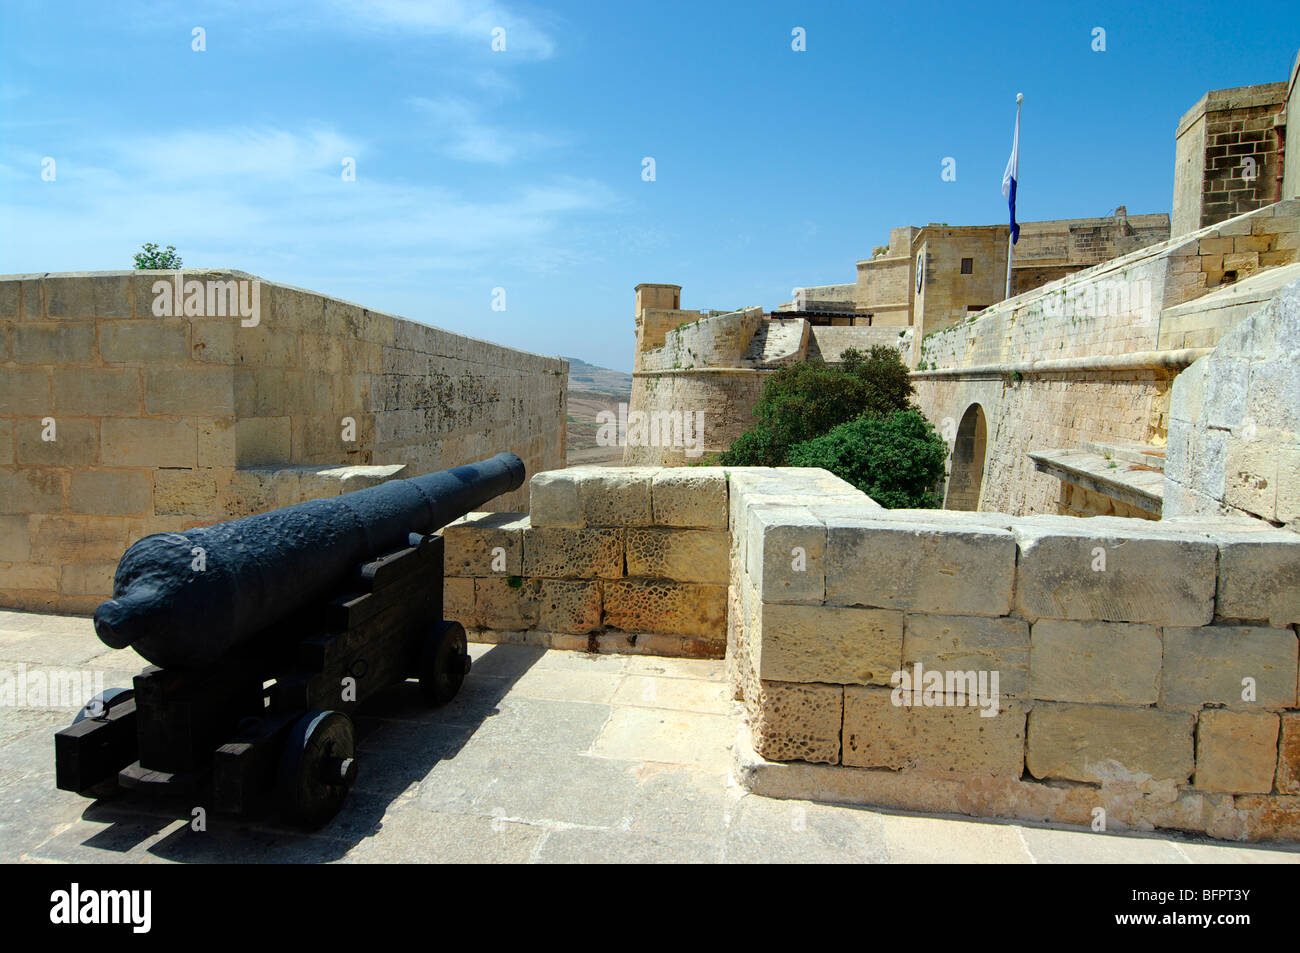 Old cannon overlooking the entrance to the Citadel, Gozo, Malta. Stock Photo